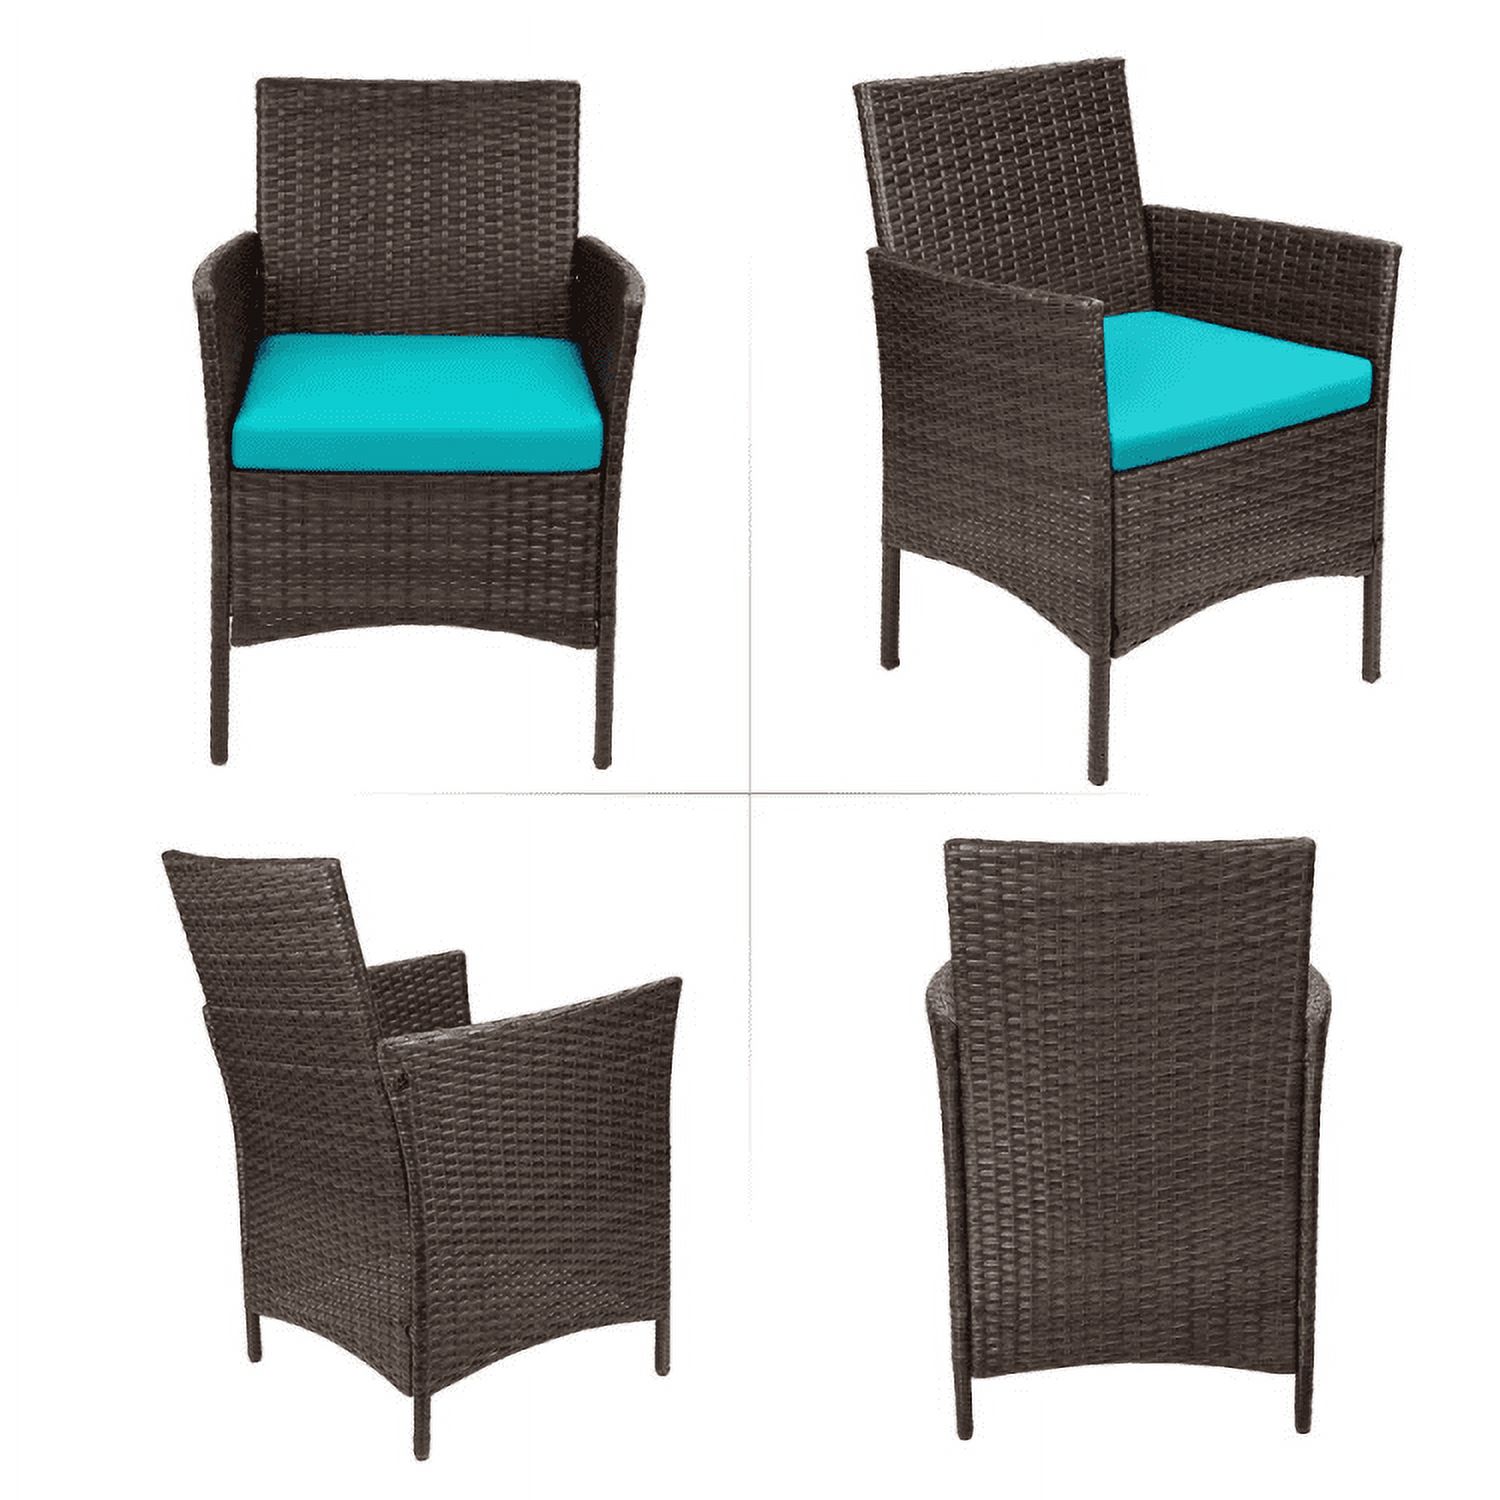 Lacoo 3 Pieces Outdoor Patio Furniture PE Rattan Wicker Table and Chairs Set Bar Set with Cushioned Tempered Glass (Brown / Blue) - image 2 of 7